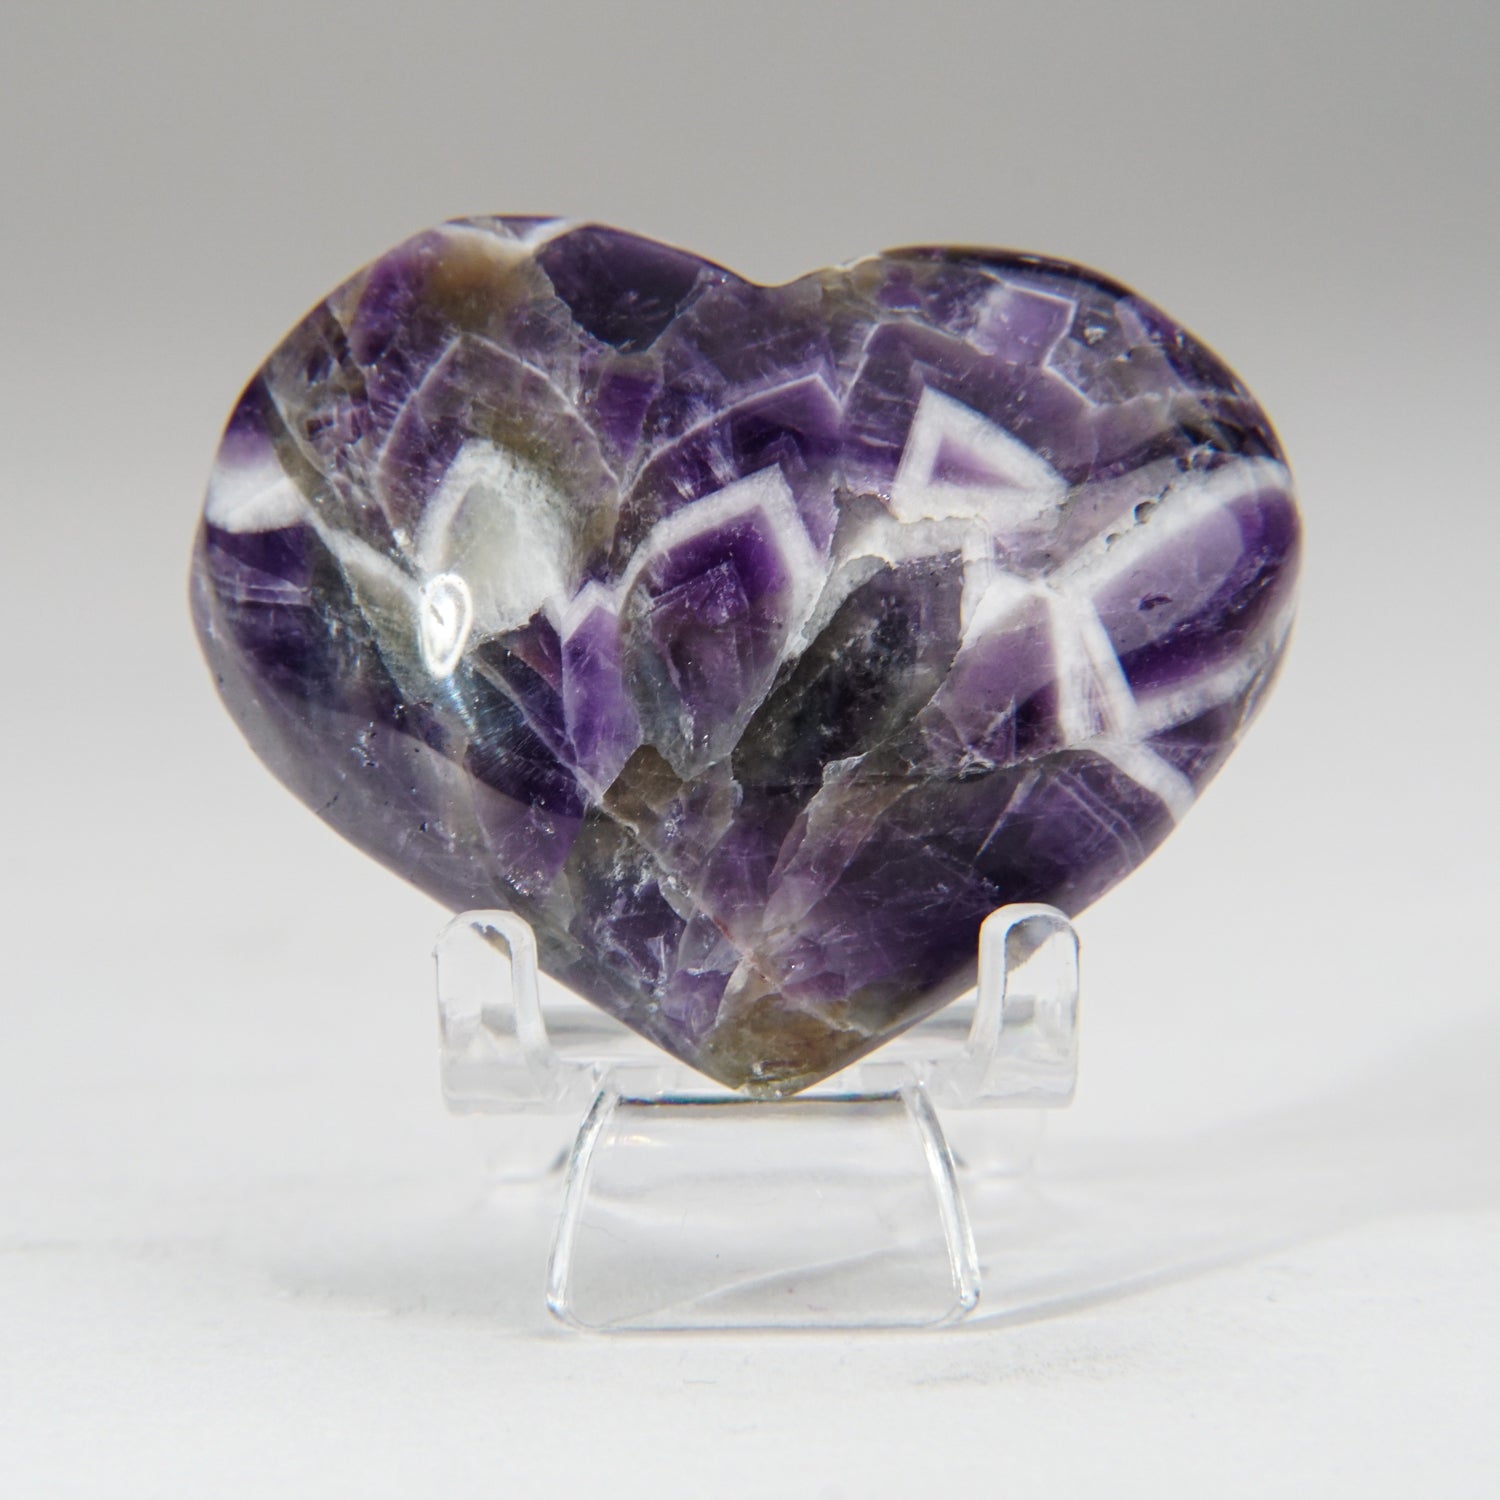 Polished Chevron Amethyst Small Heart from Brazil (67.5 grams)